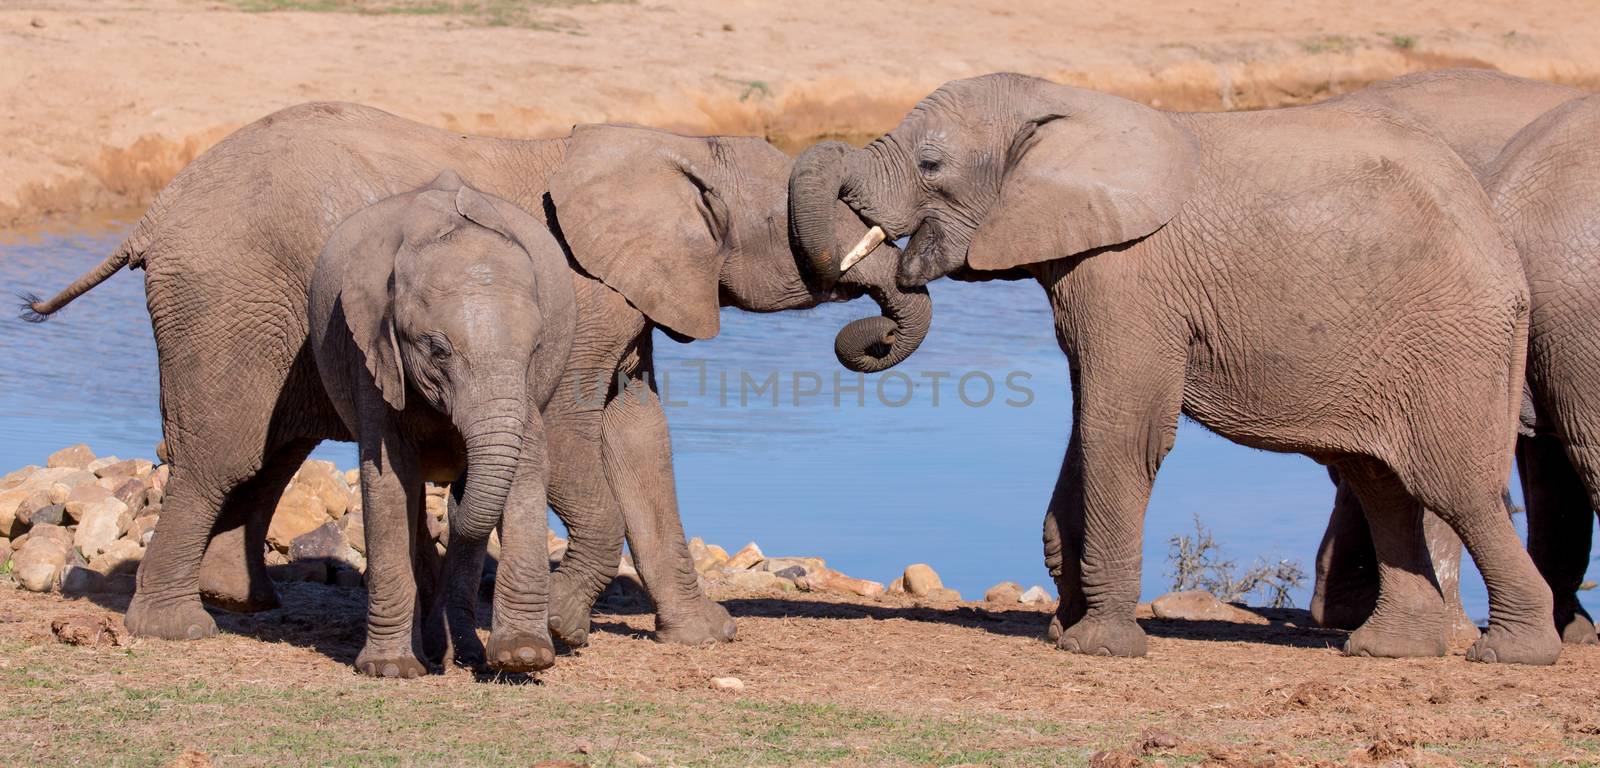 African Elephant Greeting by fouroaks